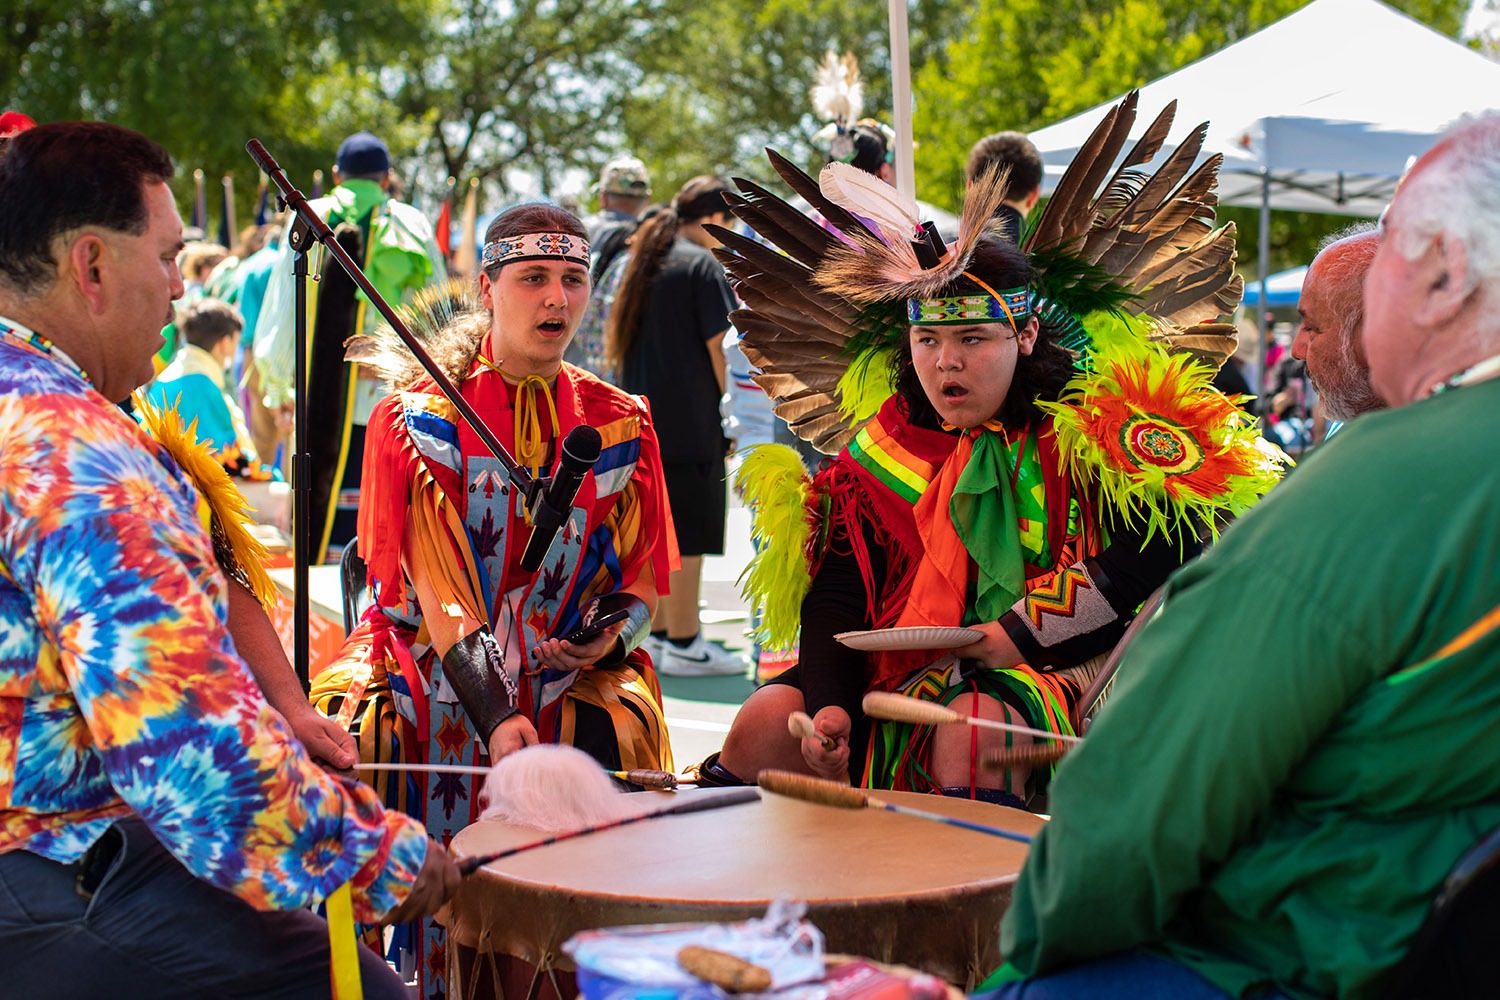 C.J. Hinojosa and Robby Soto sing, chant and pound the drums at a Native American Fiesta Pow Wow at Mission County Park #2, San Antonio, Texas. Photo by Kaylee Greenlee Beal | Heron contributor